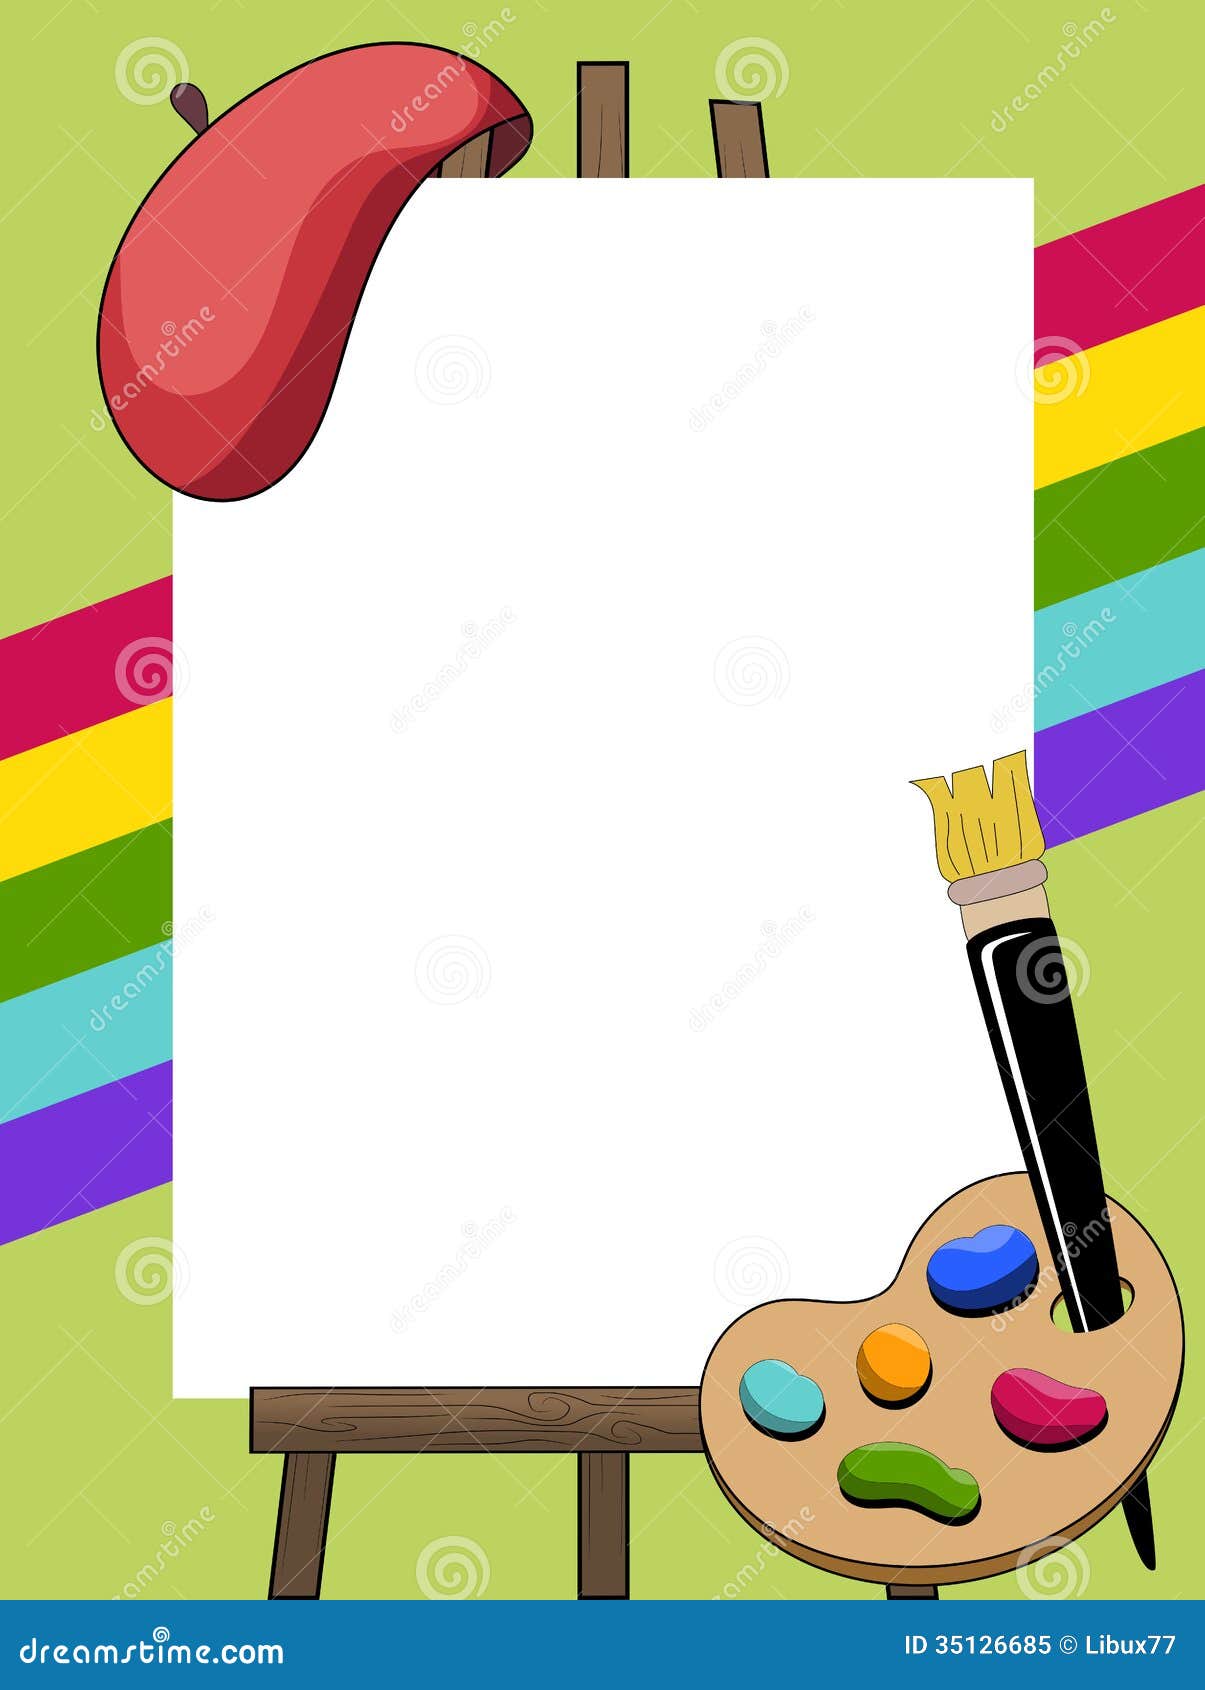 Artist painter frame with palette , brush and beret arranged around 